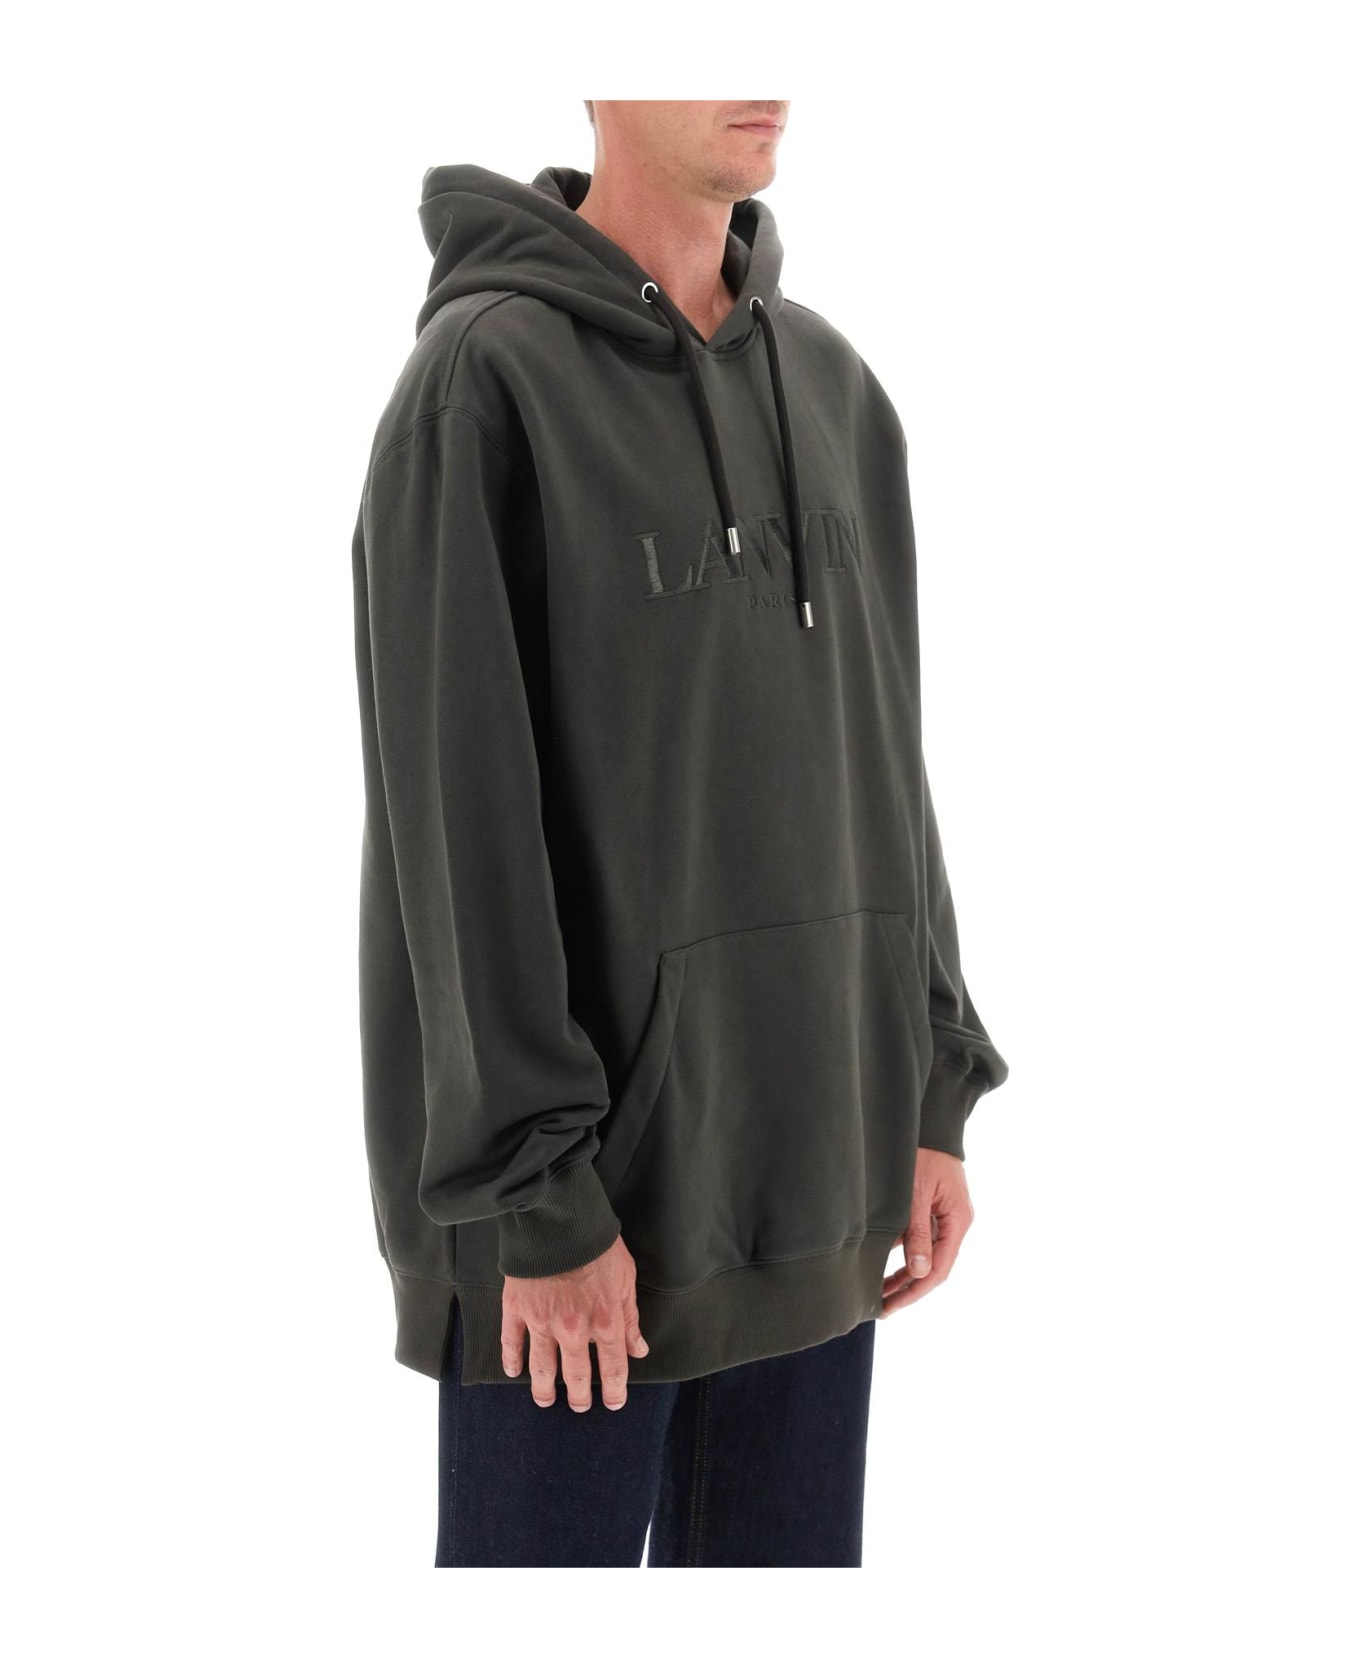 Lanvin Hoodie With Curb Embroidery - GREY